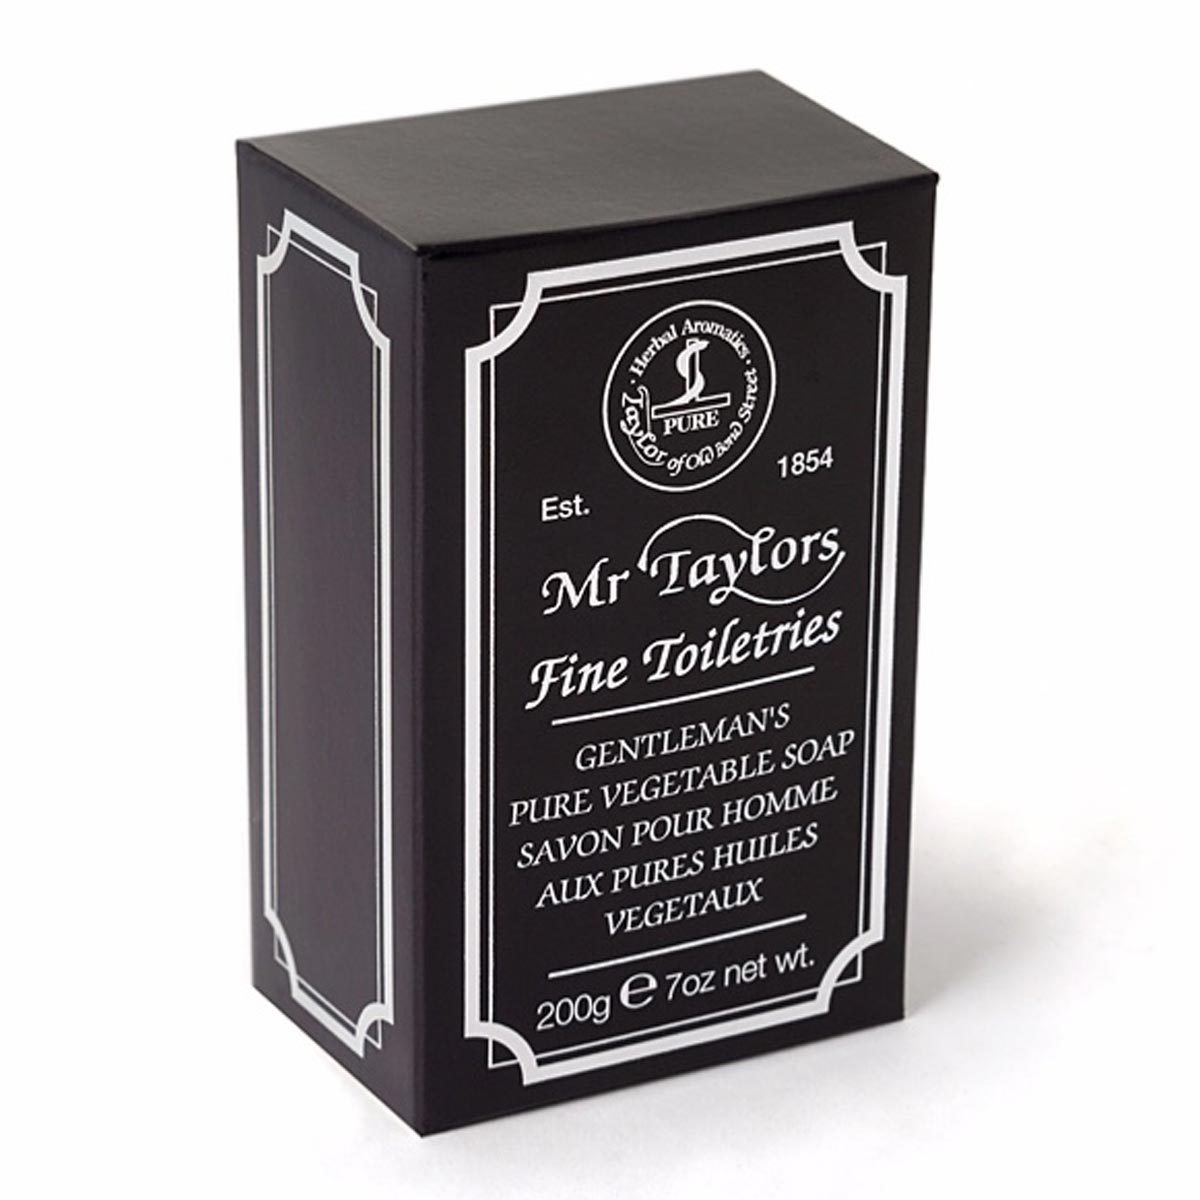 Primary image of Mr. Taylor Bath Soap